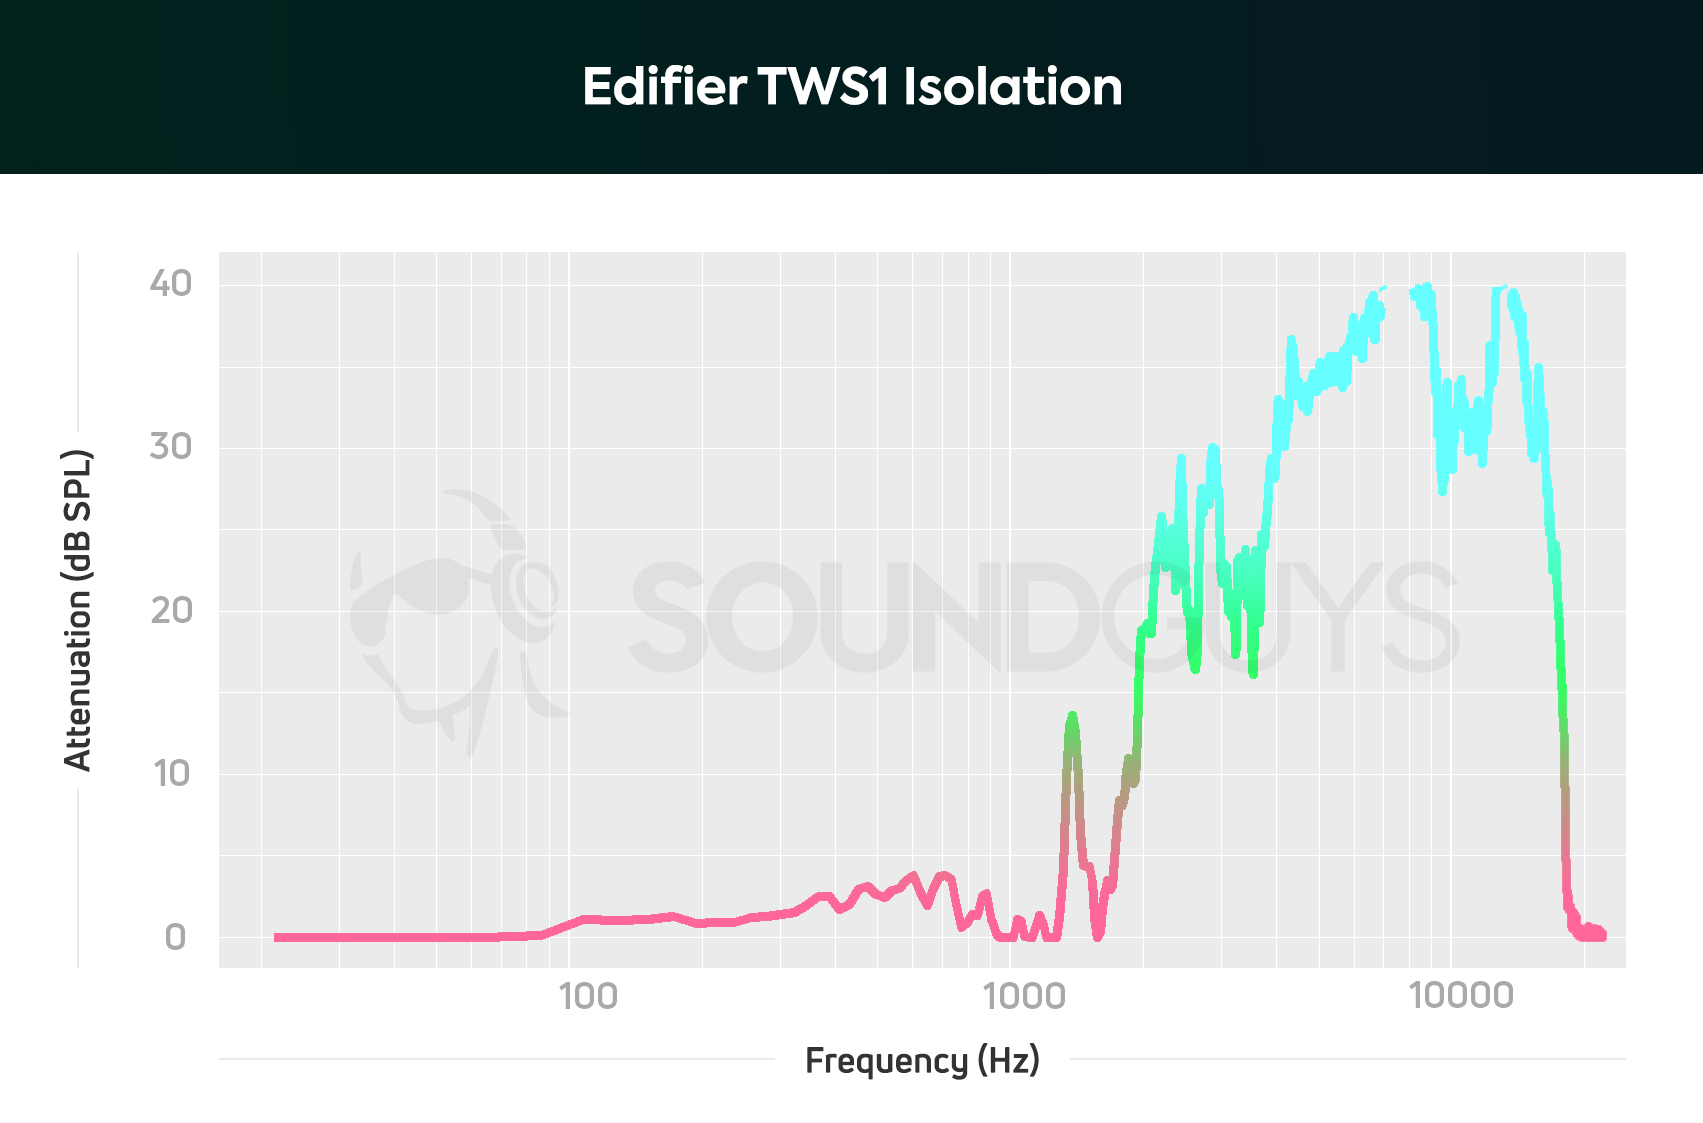 A isolation chart of the Edifier TWS1 true wireless earbuds.